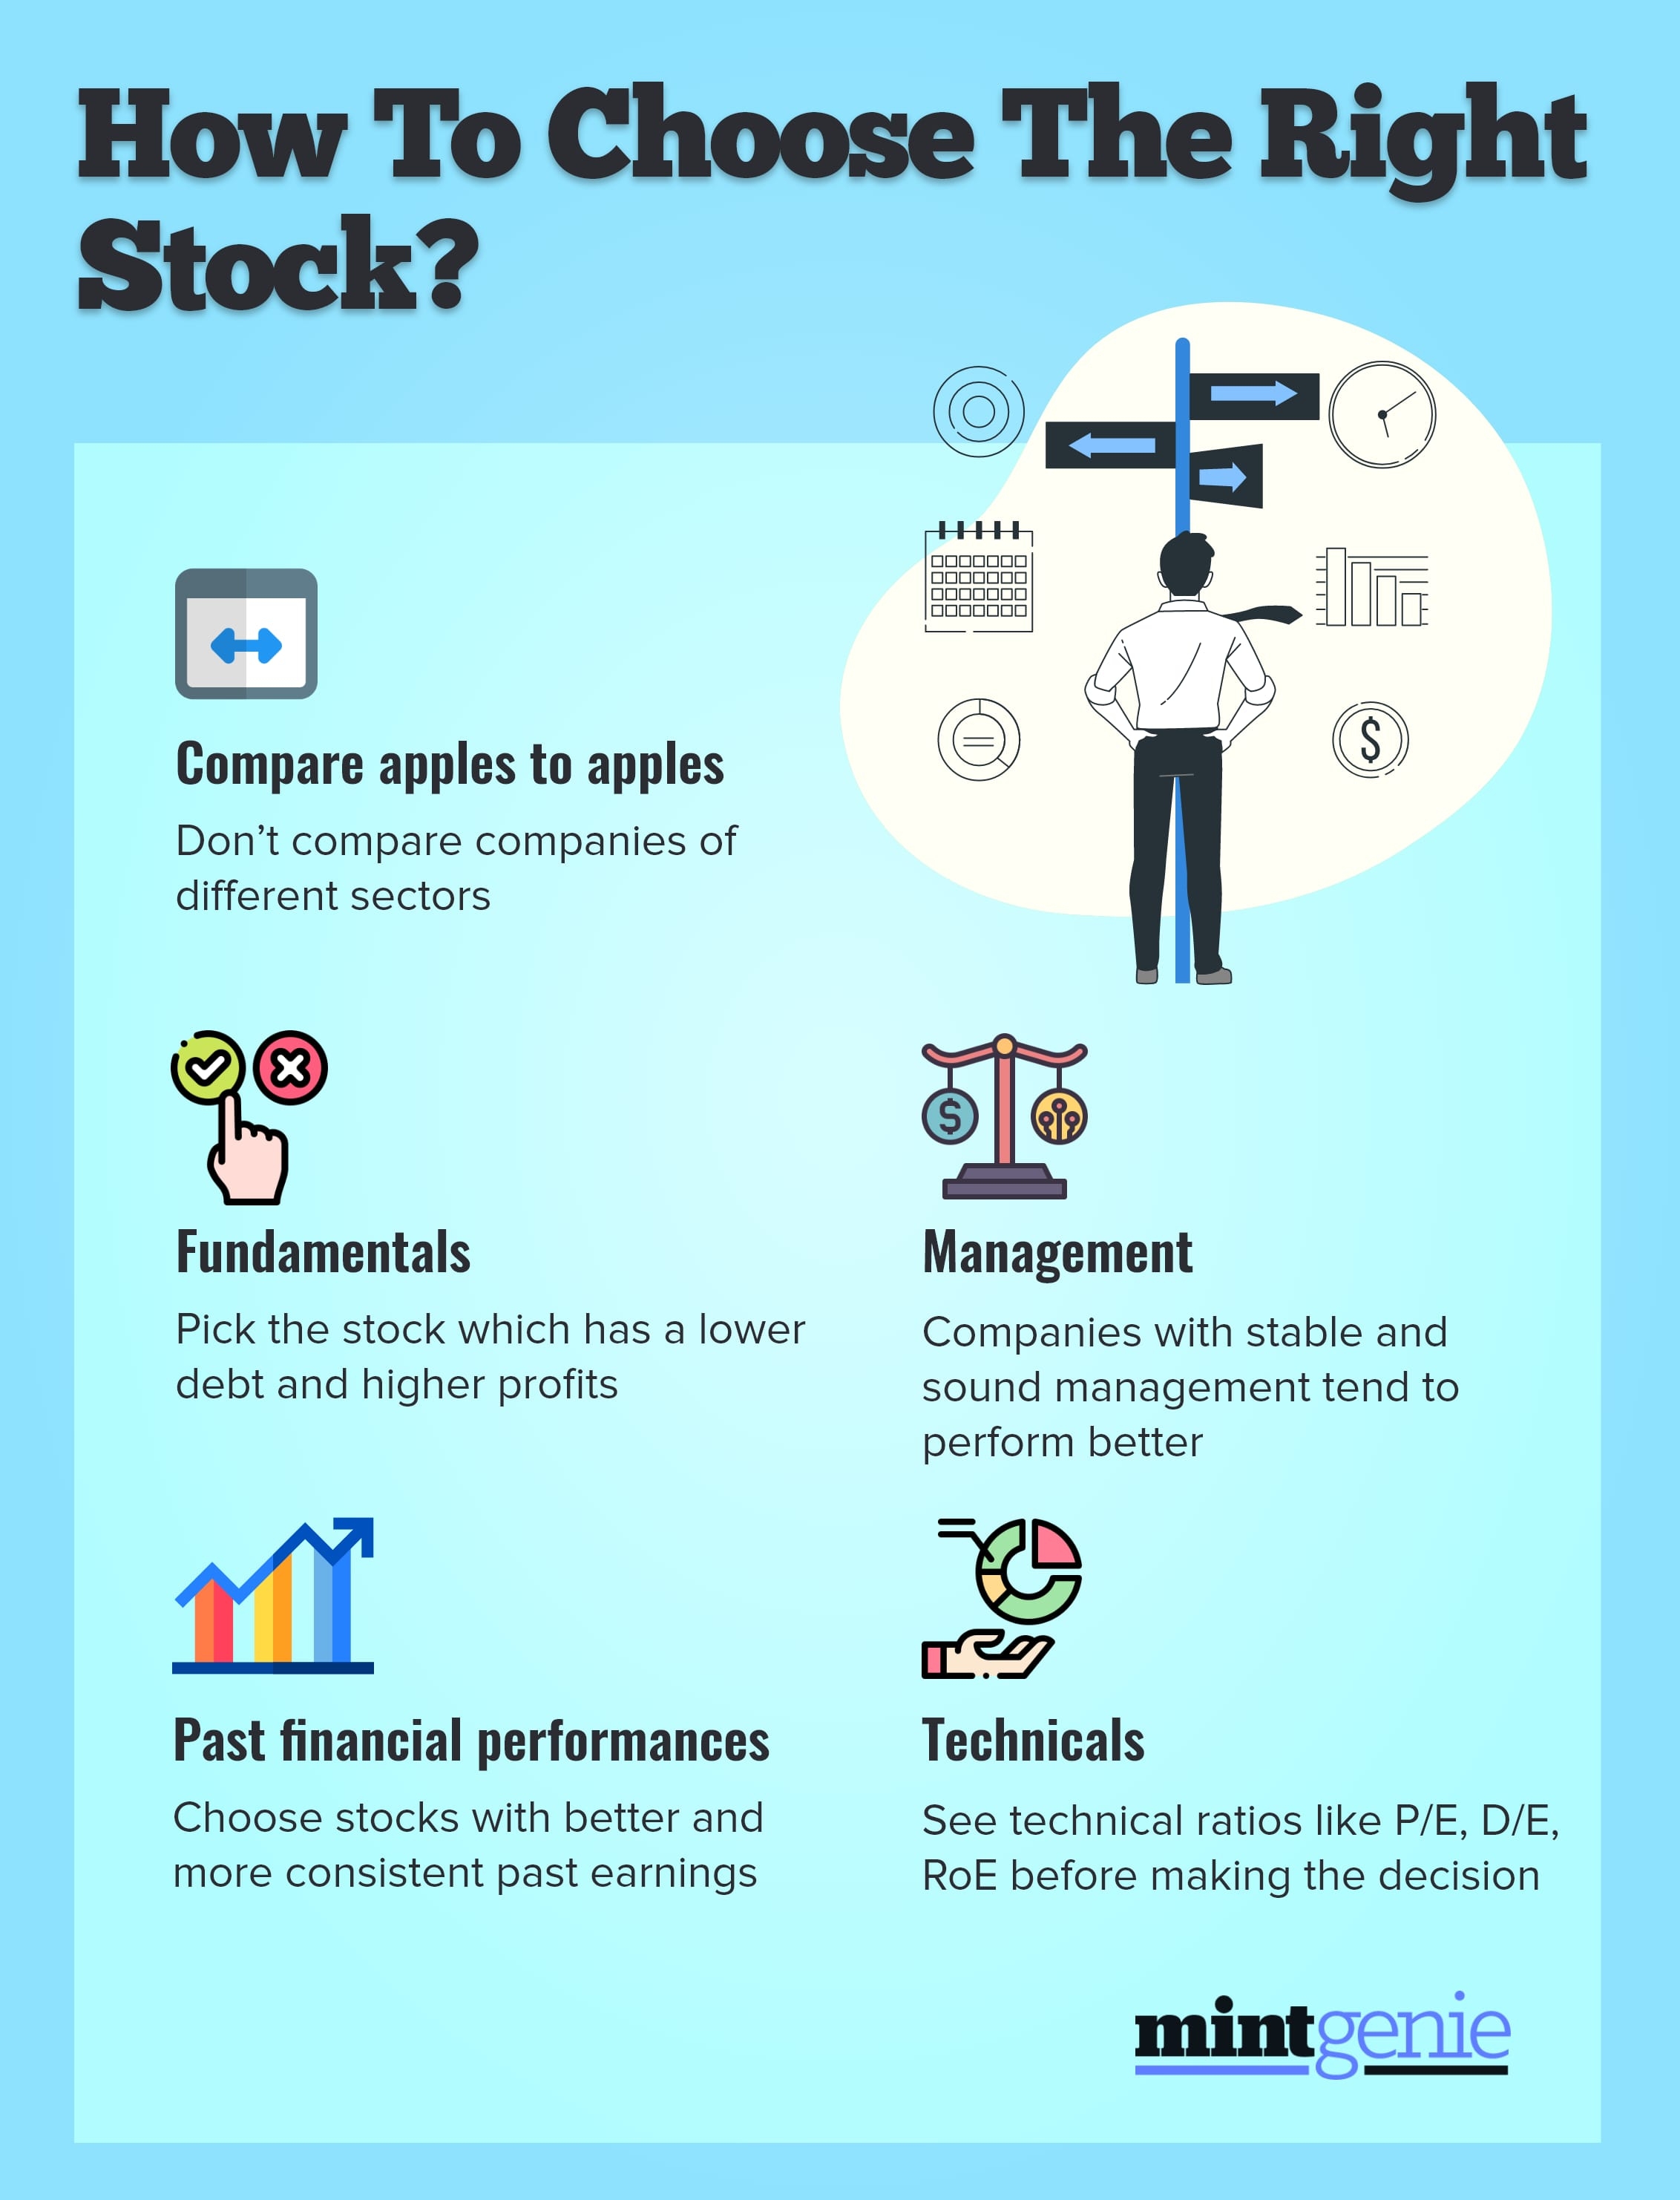 How to choose the right stock